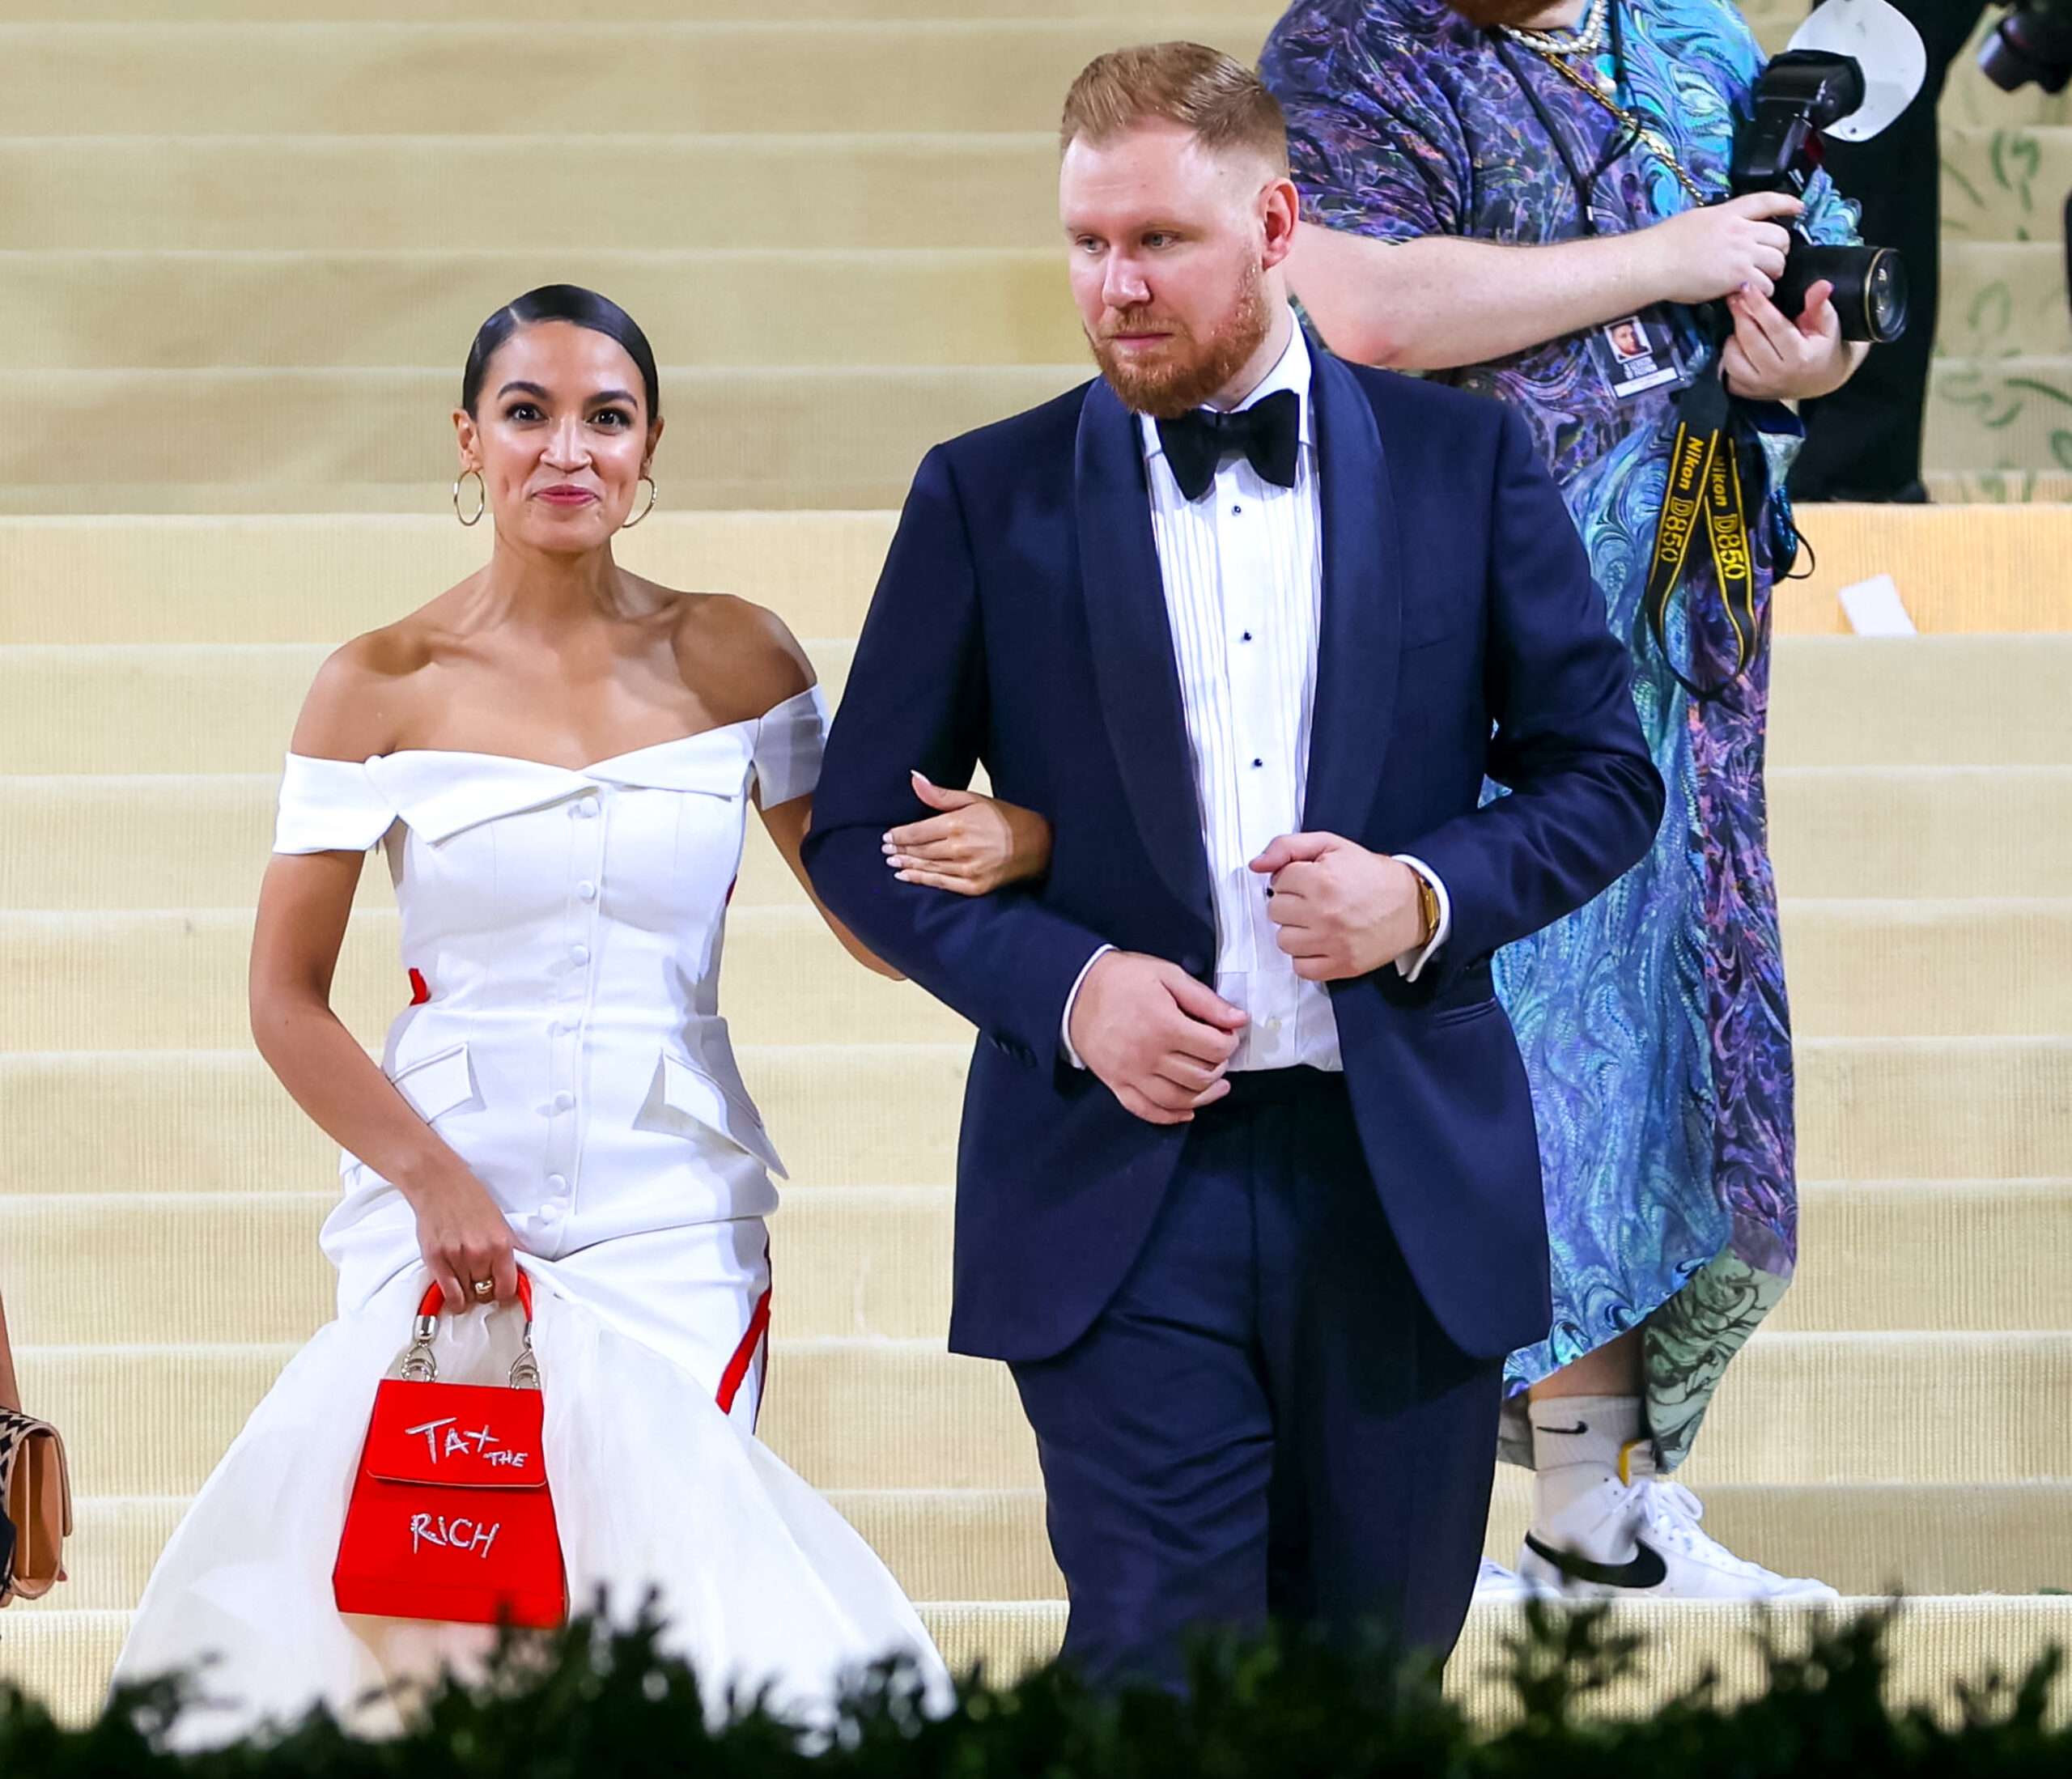 The Problem With the Met Gala Wasn't AOC's Dress, It Was Pandemic Hypocrisy